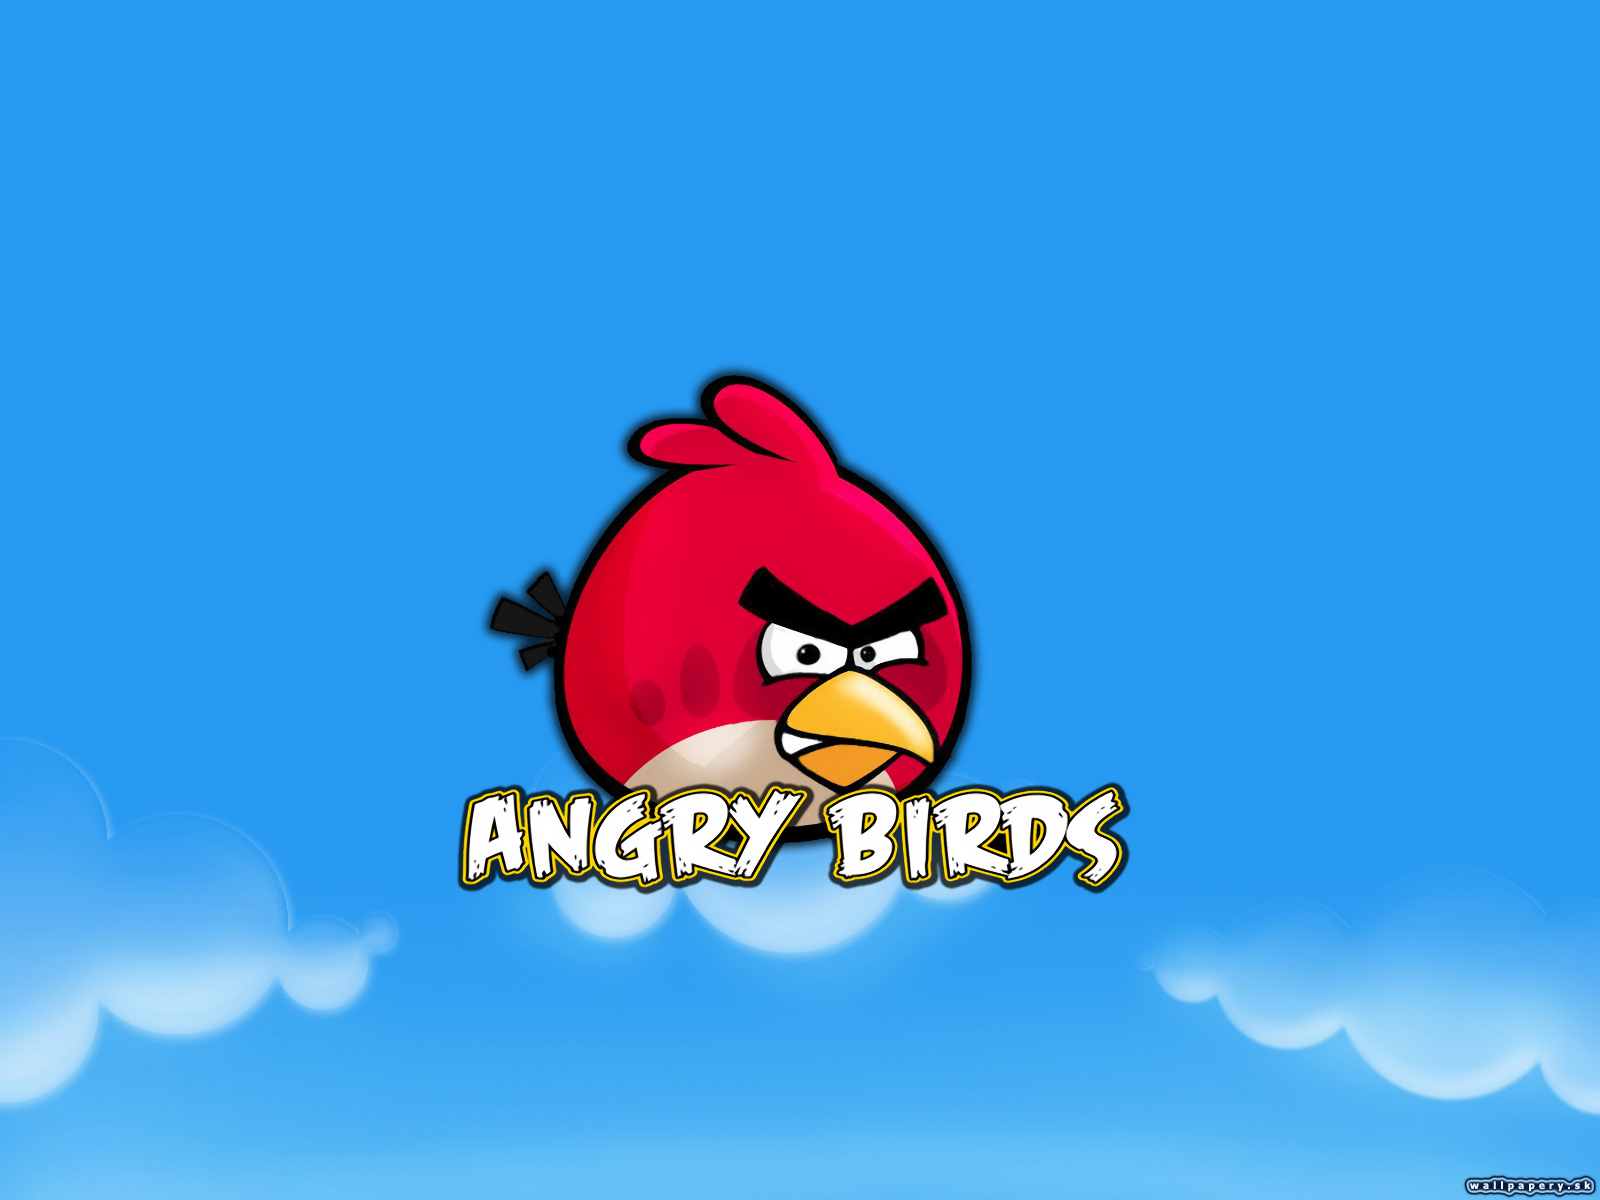 Angry Birds - wallpaper 4